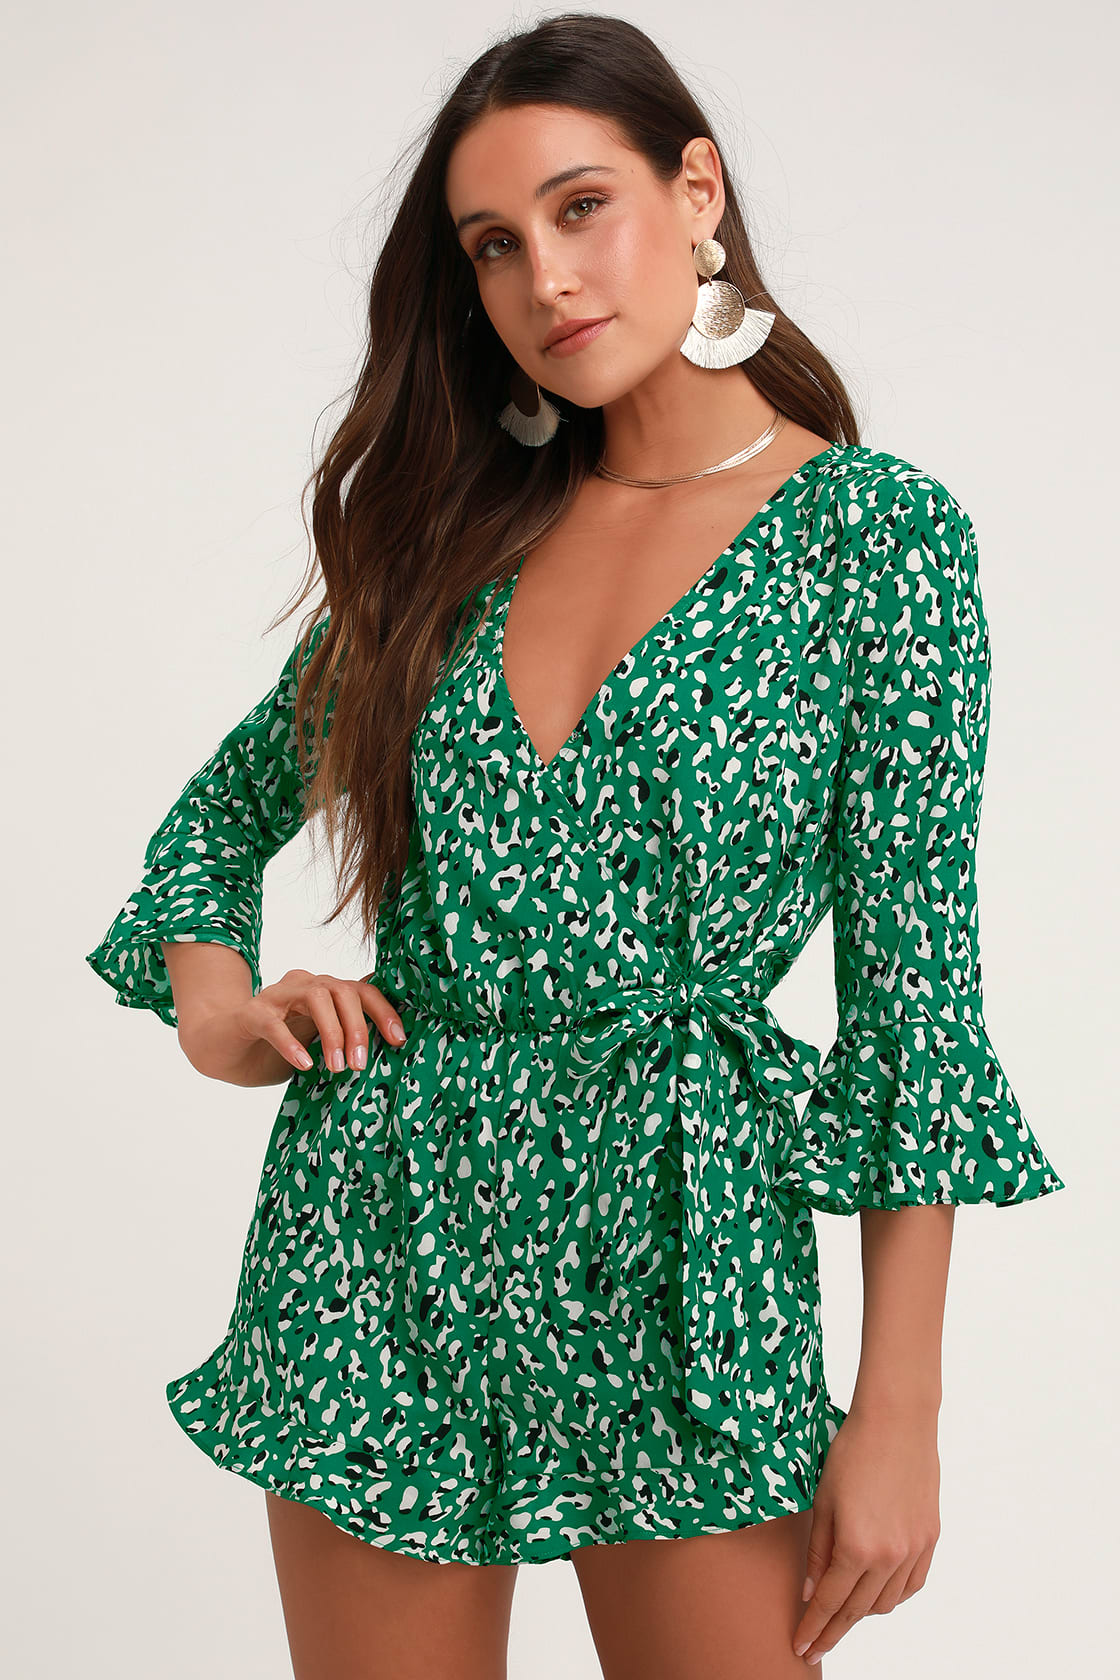 Make Moves Green and Black Print Flounce Sleeve Romper